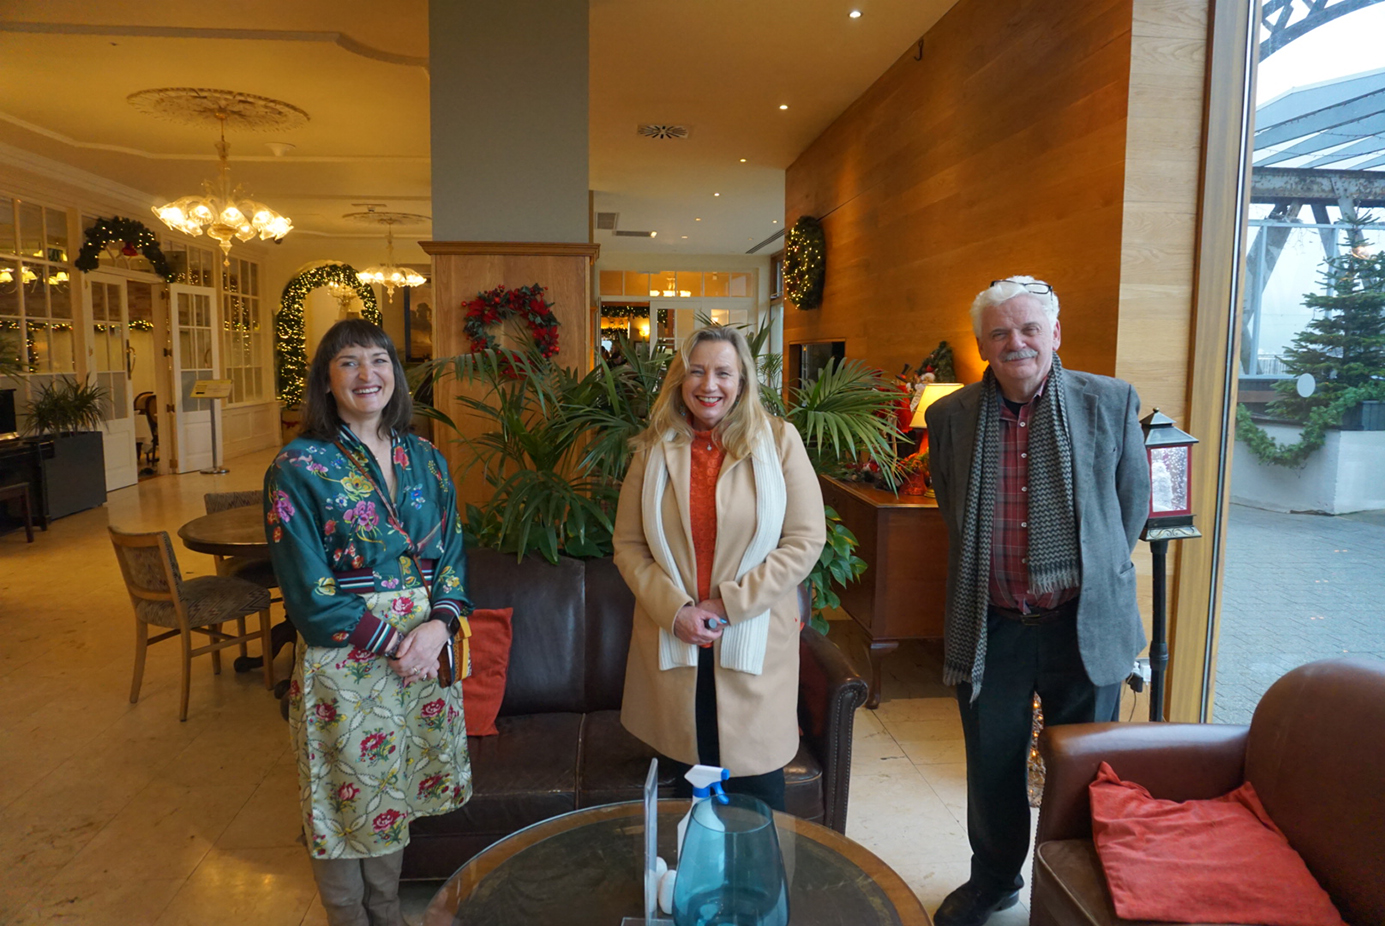 Lydia Little (left) with Mary O'Donovan and Maurice Sweeney of Sweeney and O'Donovan Publishing.